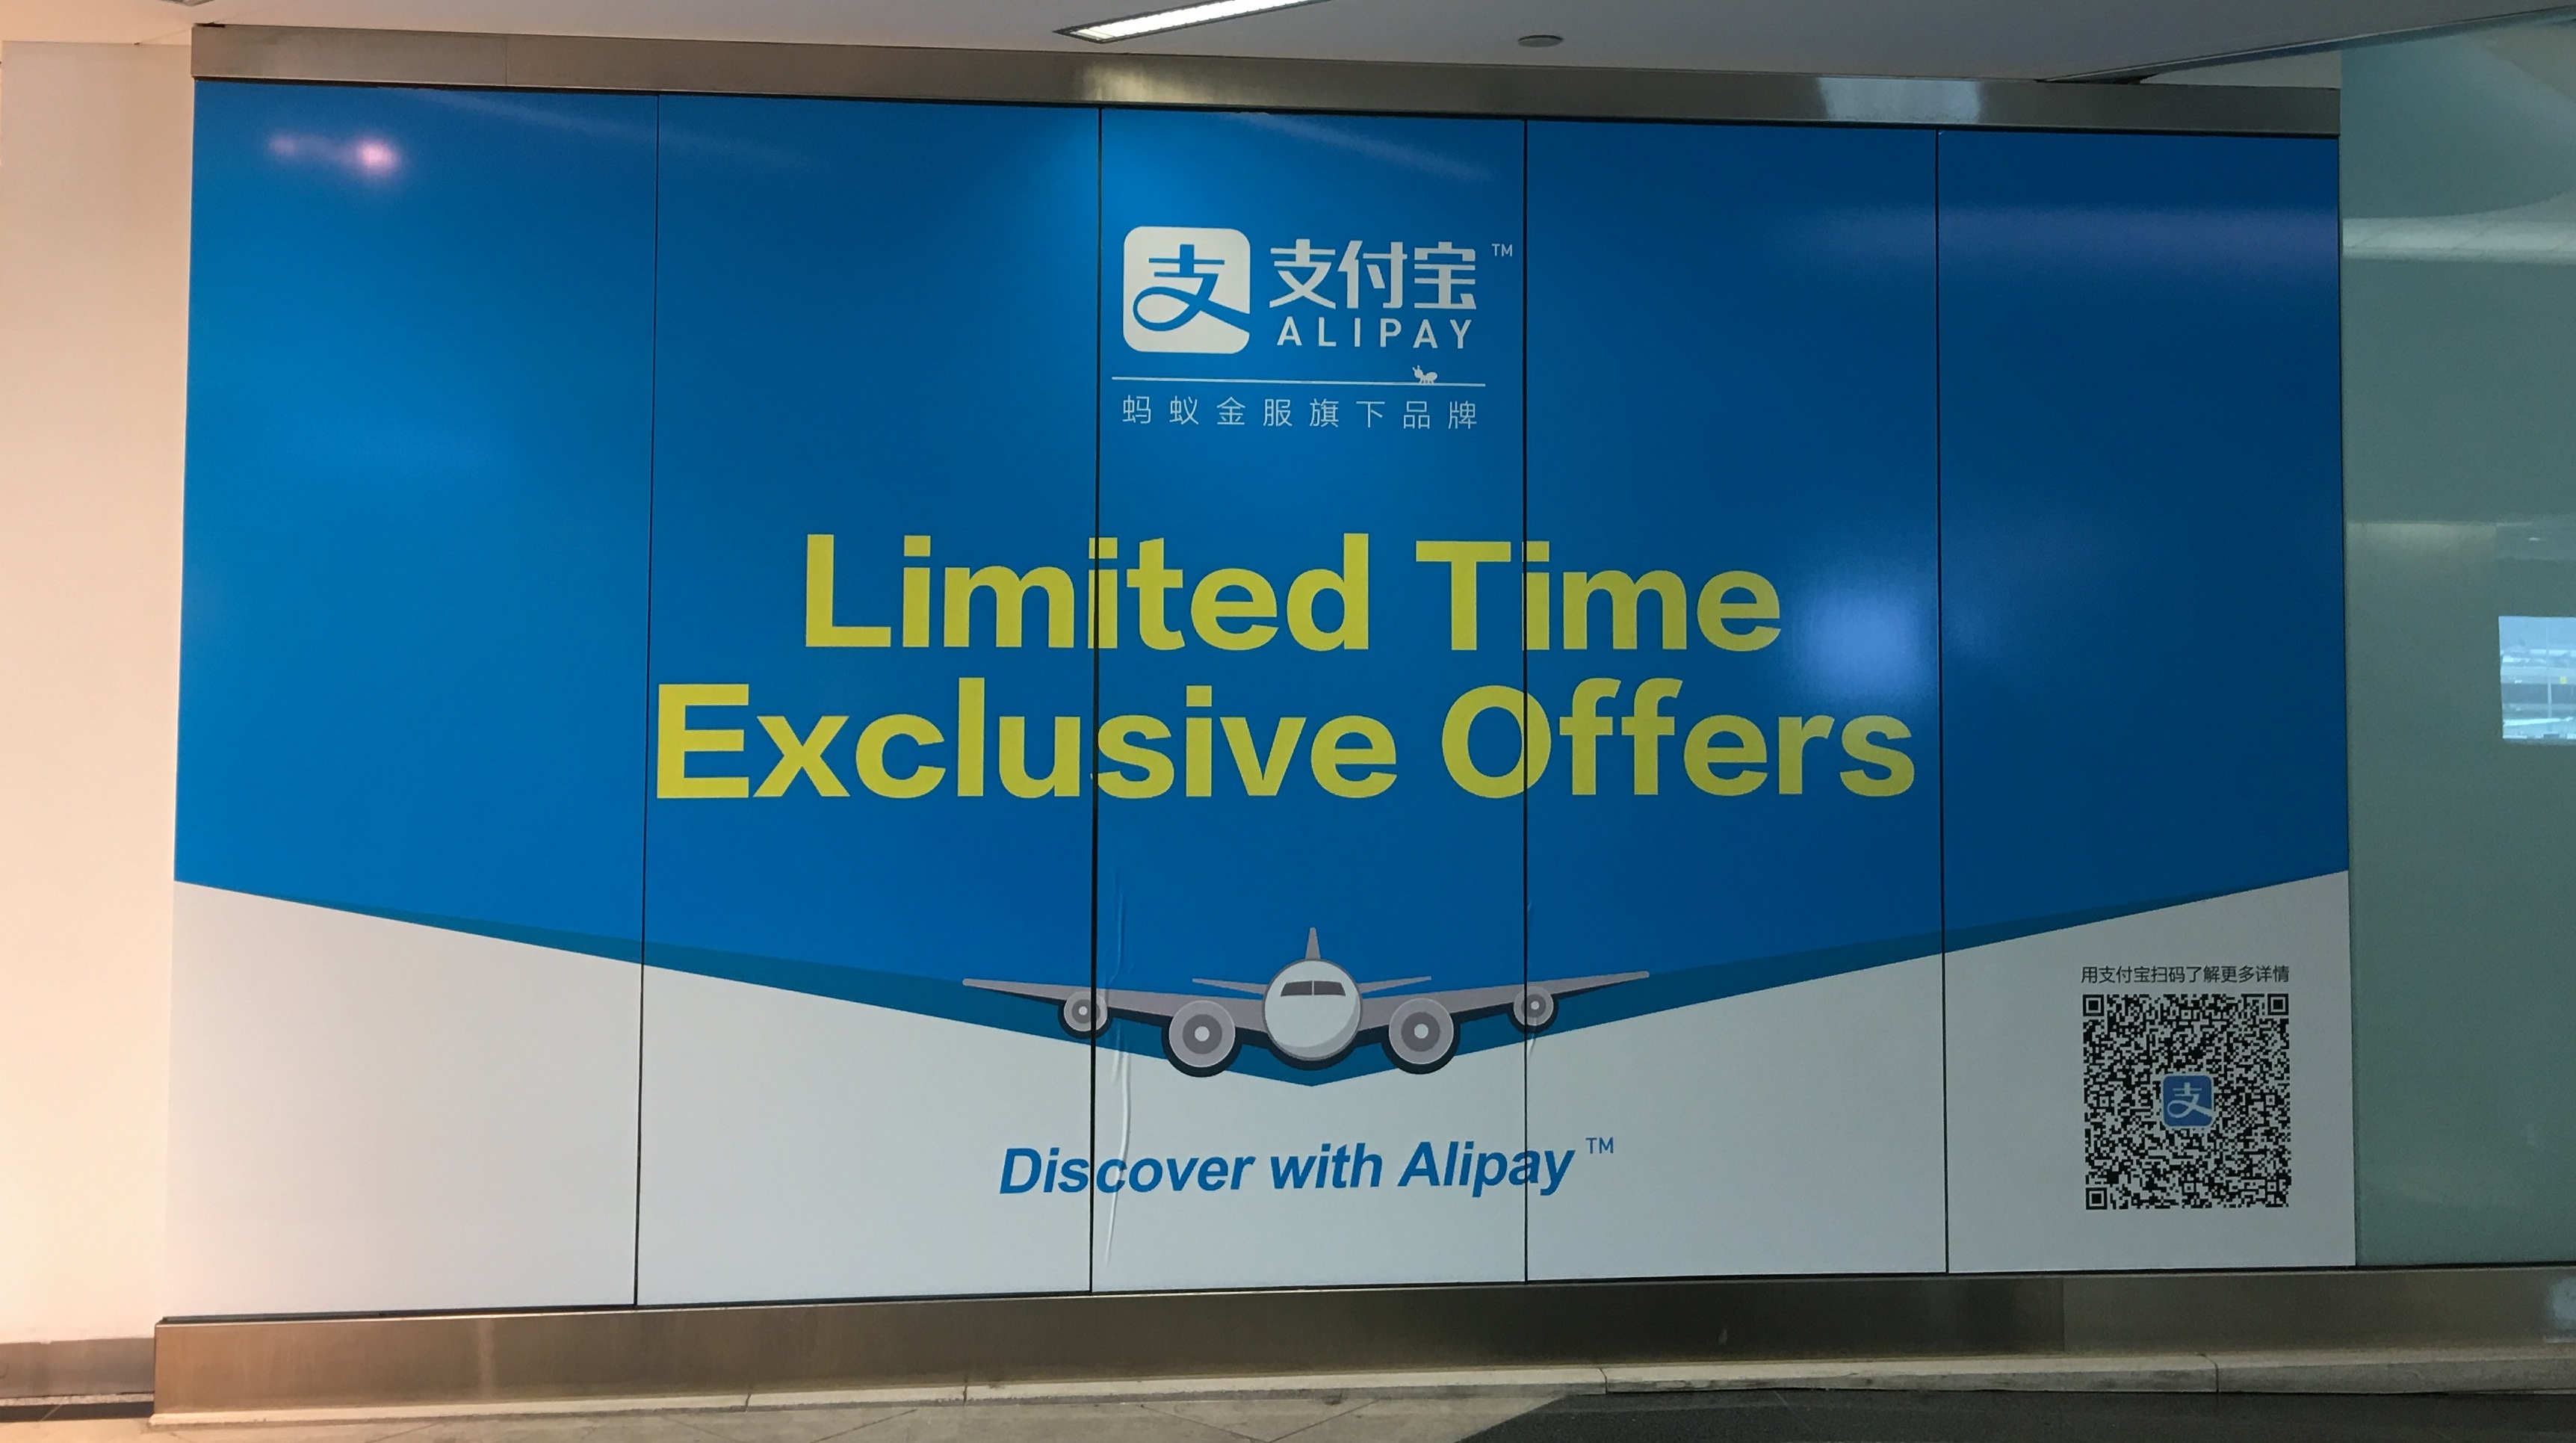 DFS Group and Ant Group enhance shopping experience with Alipay+